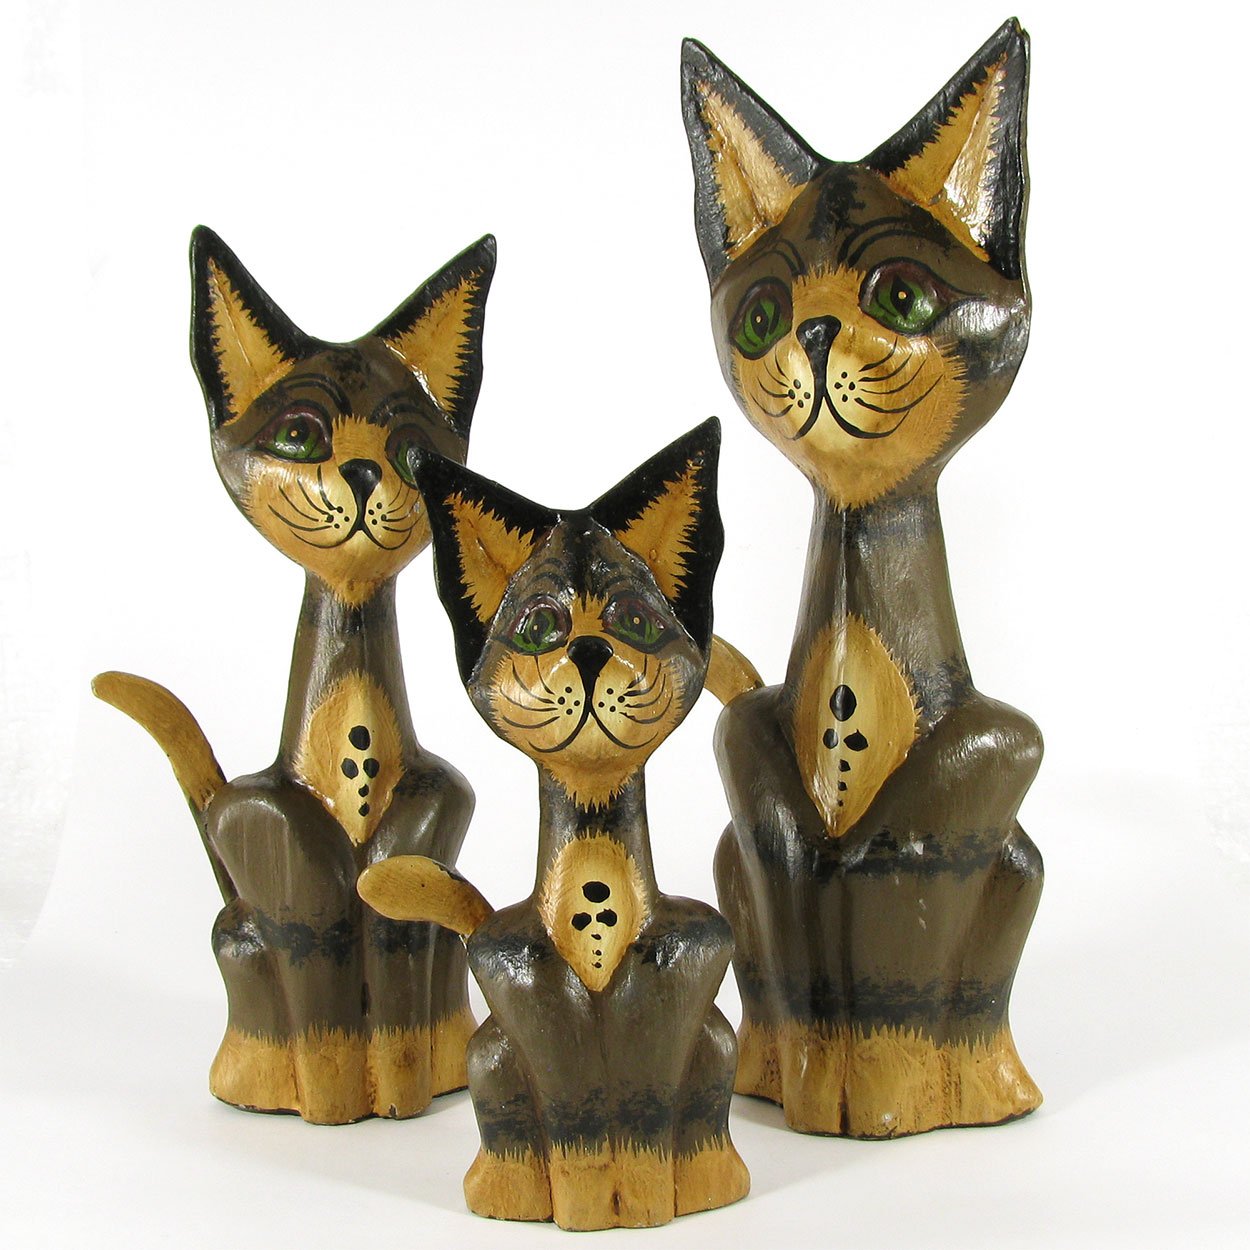 140046 - Set of Three 8-12in Wooden Cats - Brown